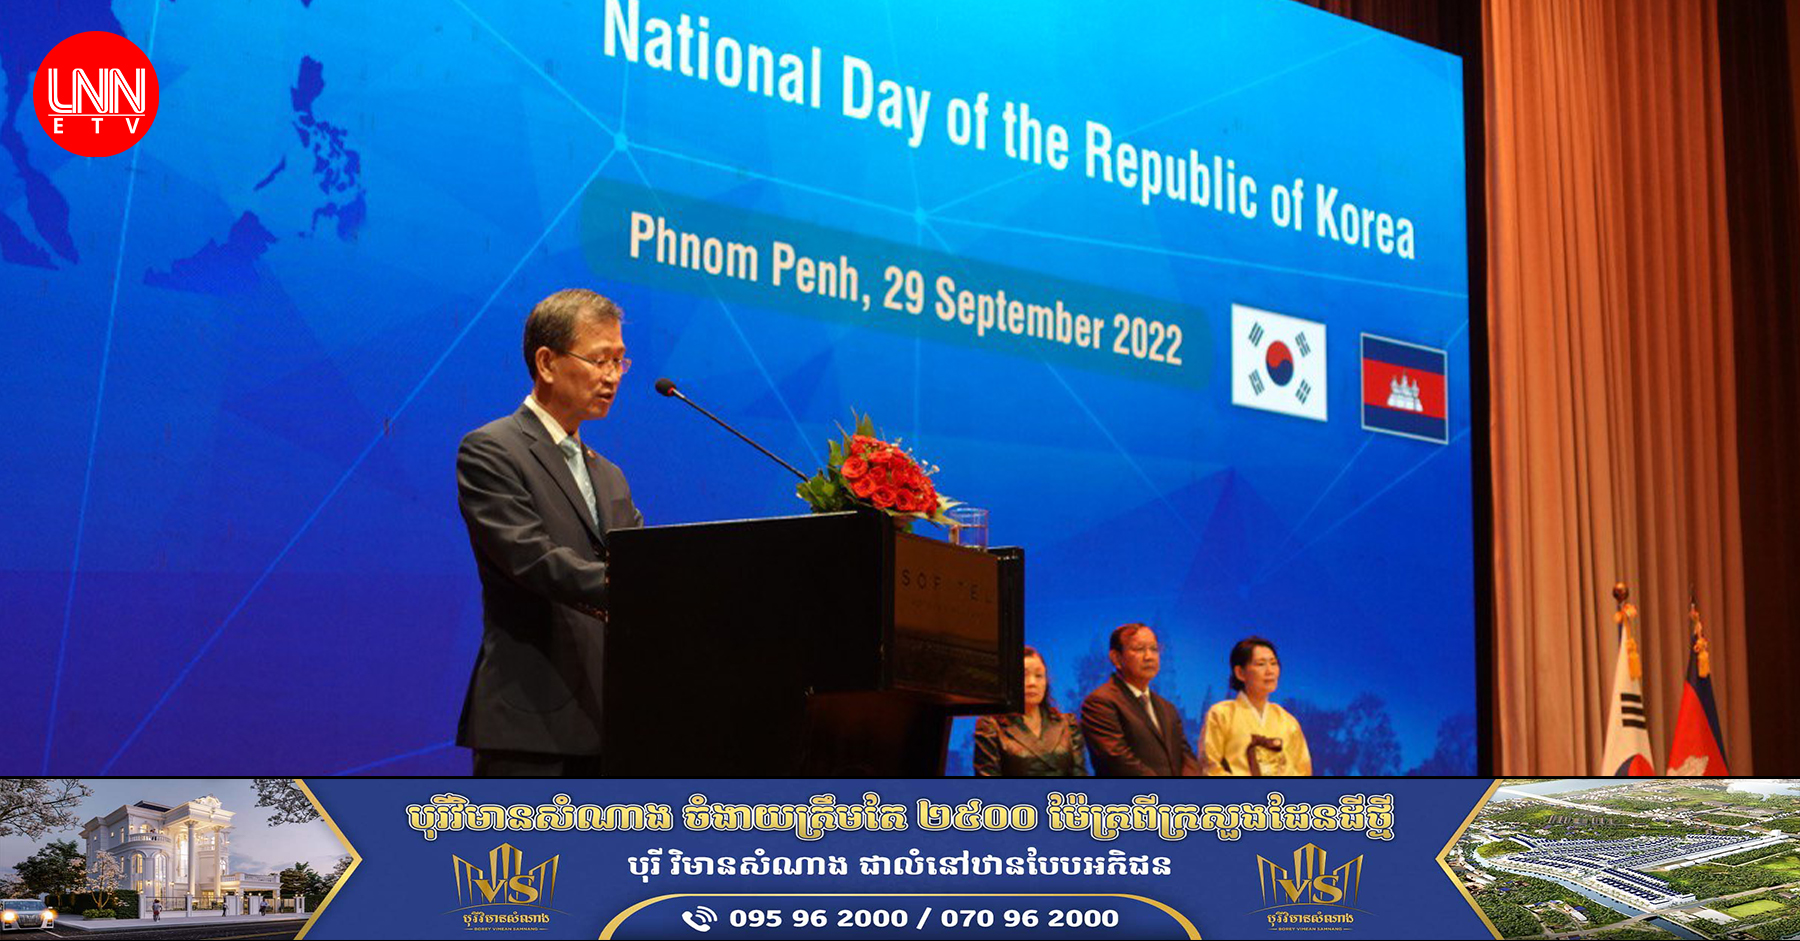 H.E Park Heung-Kyeong, Prime Minister Hun Sen played a key role in restoring the diplomatic relations between the two